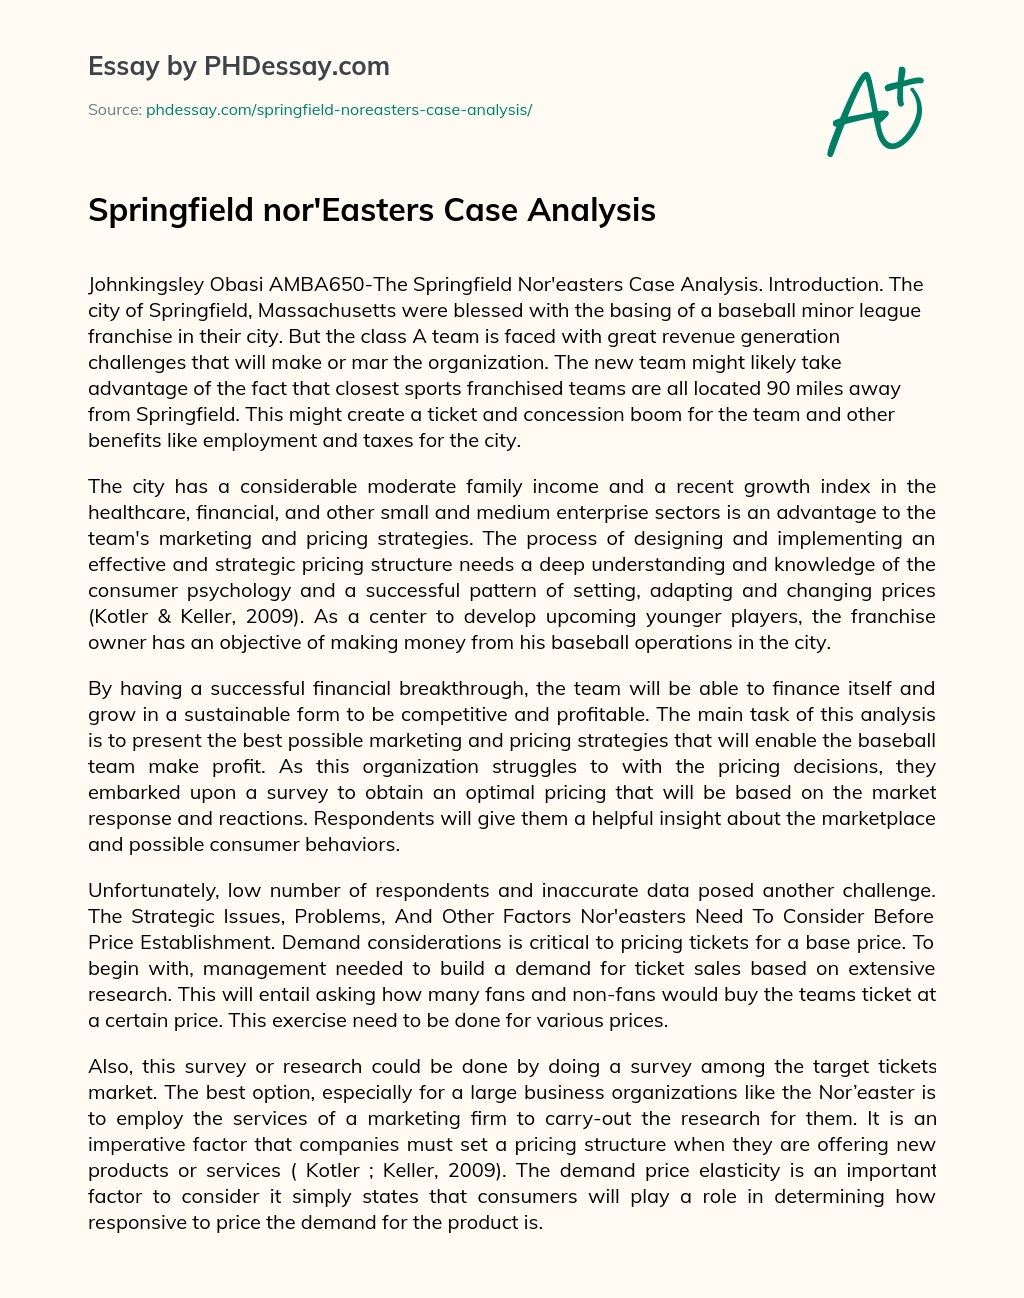 Springfield nor’Easters Case Analysis essay